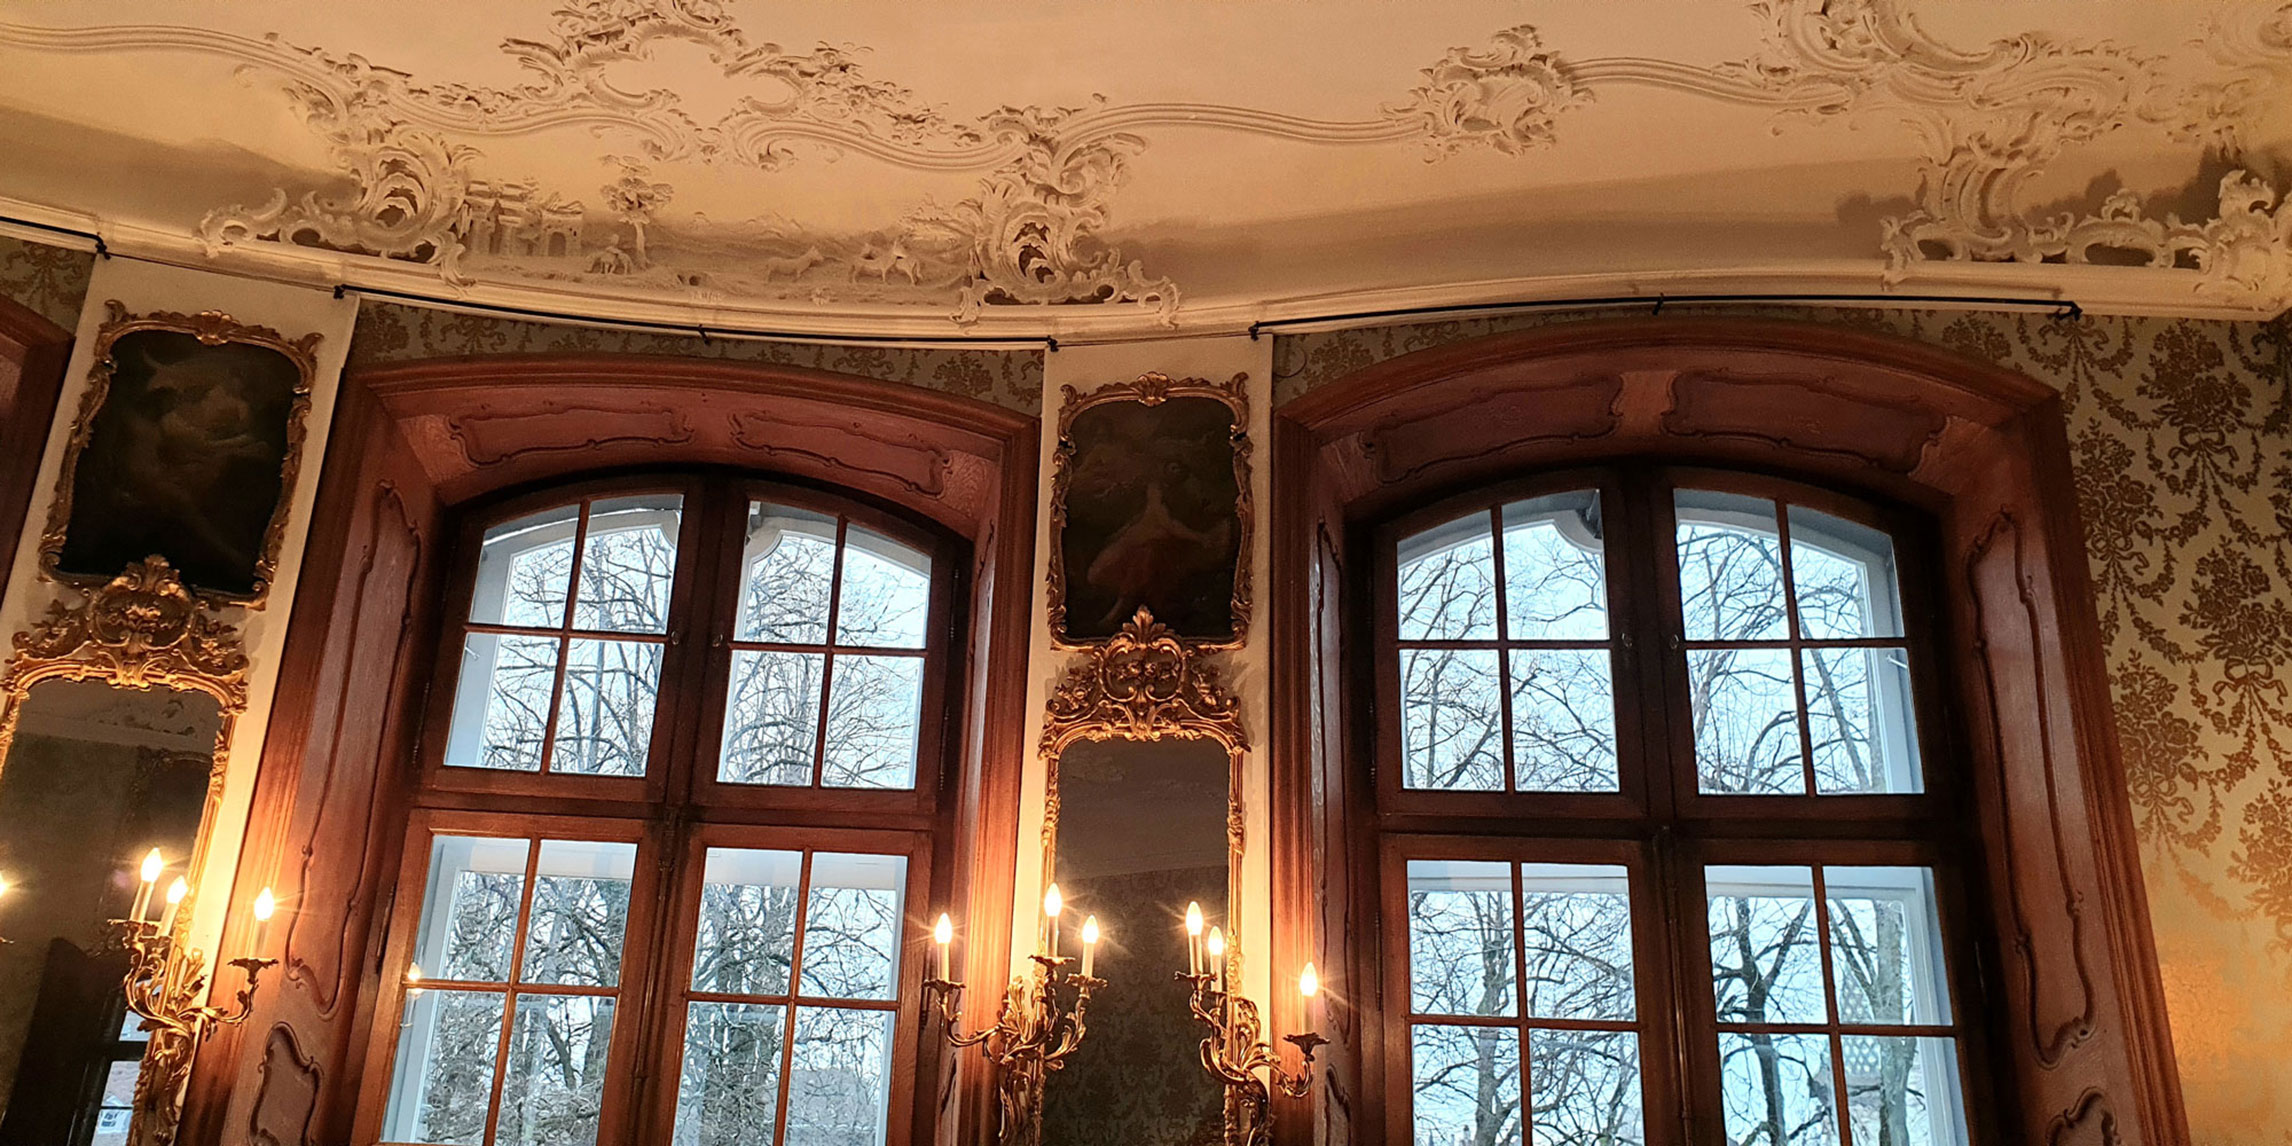 windows and ceiling decoration in the rococo style in the Wildt'sche Haus Basel